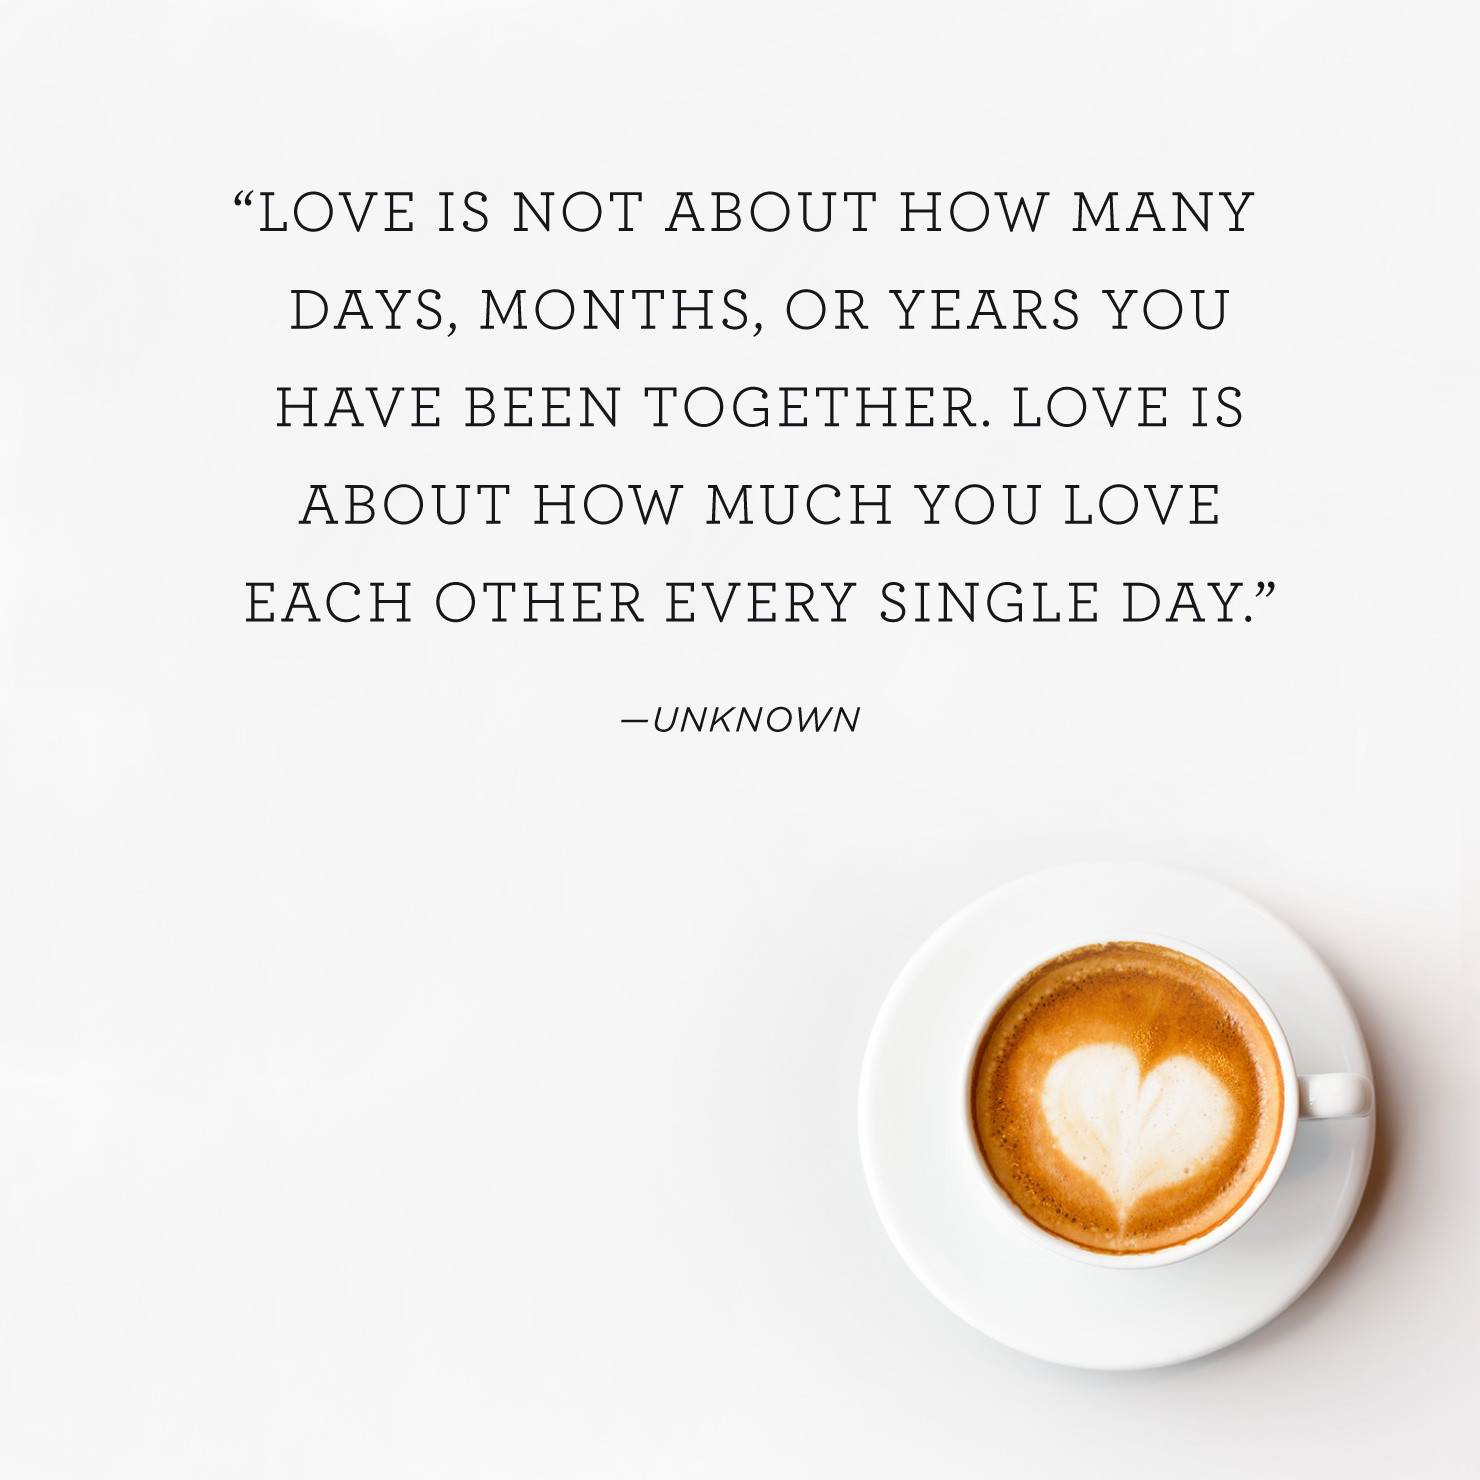 Love Quotes For Anniversary
 60 Happy Anniversary Quotes to Celebrate Your Love